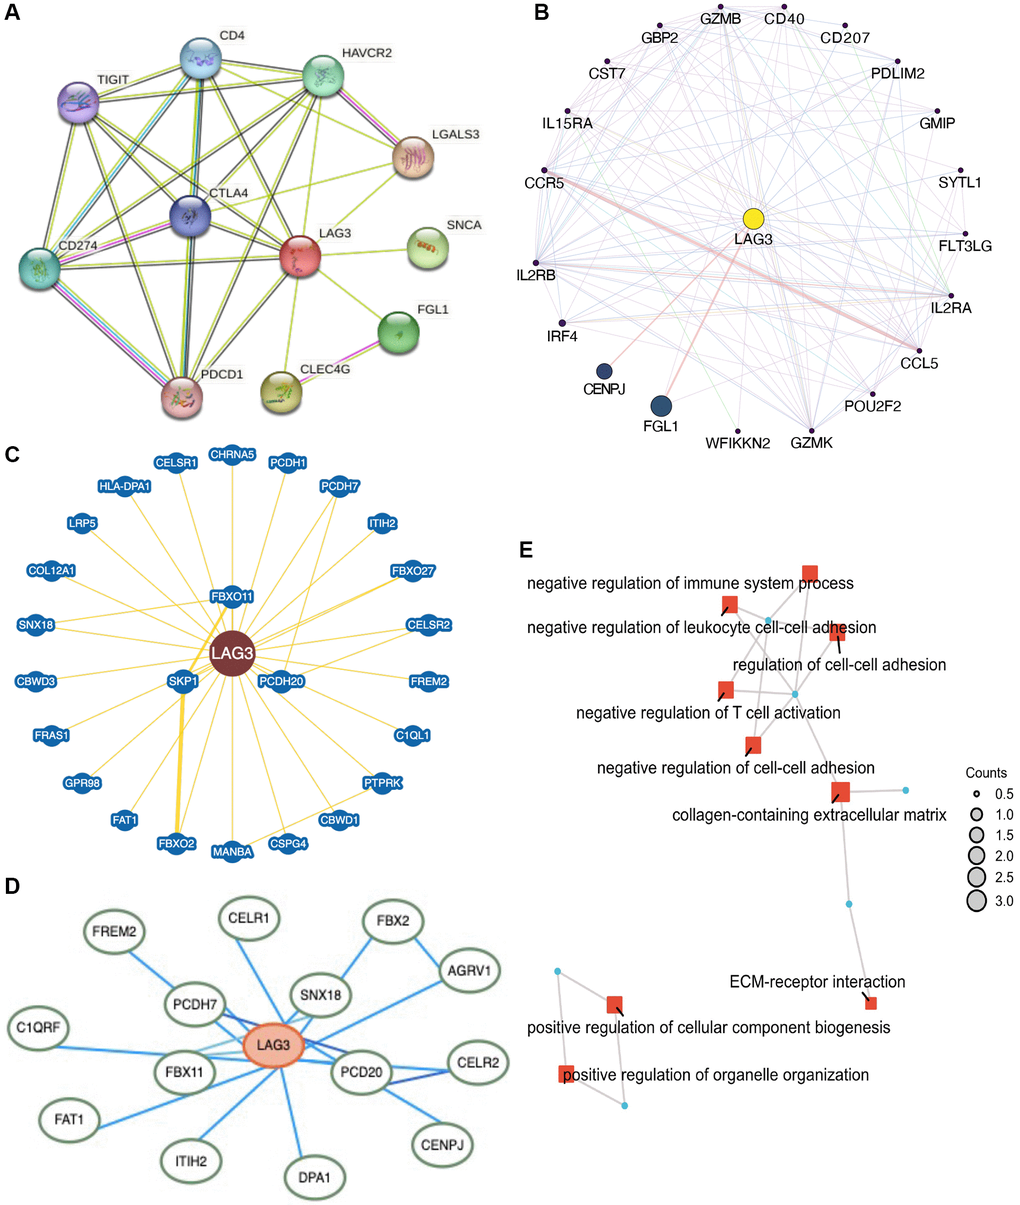 Network construction and enrichment analysis for LAG3 co-expression genes in KIRC. LAG3-related genes were analyzed via STRING (A), GeneMANIA (B), BioGRID (C), and HitPredict (D) sites. (E) GO and KEGG enrichment analysis.